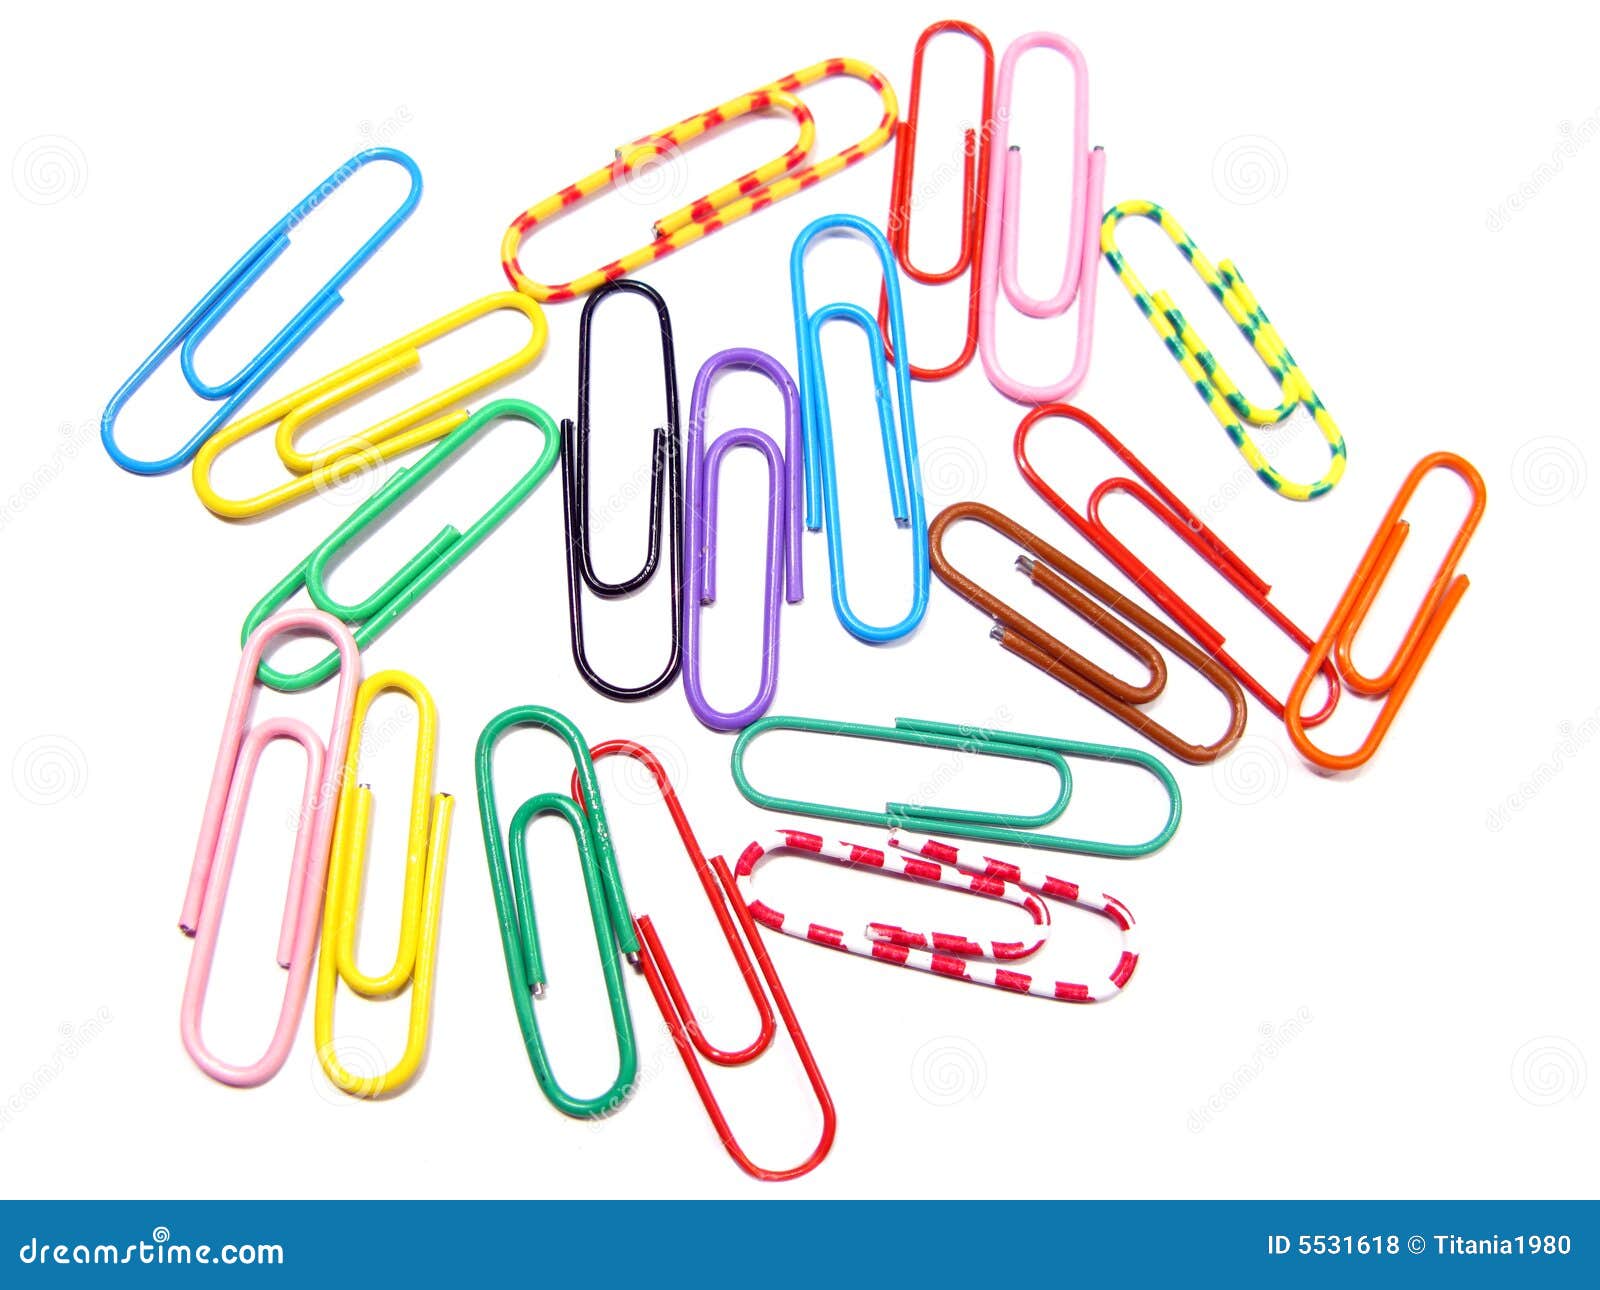 paper clips